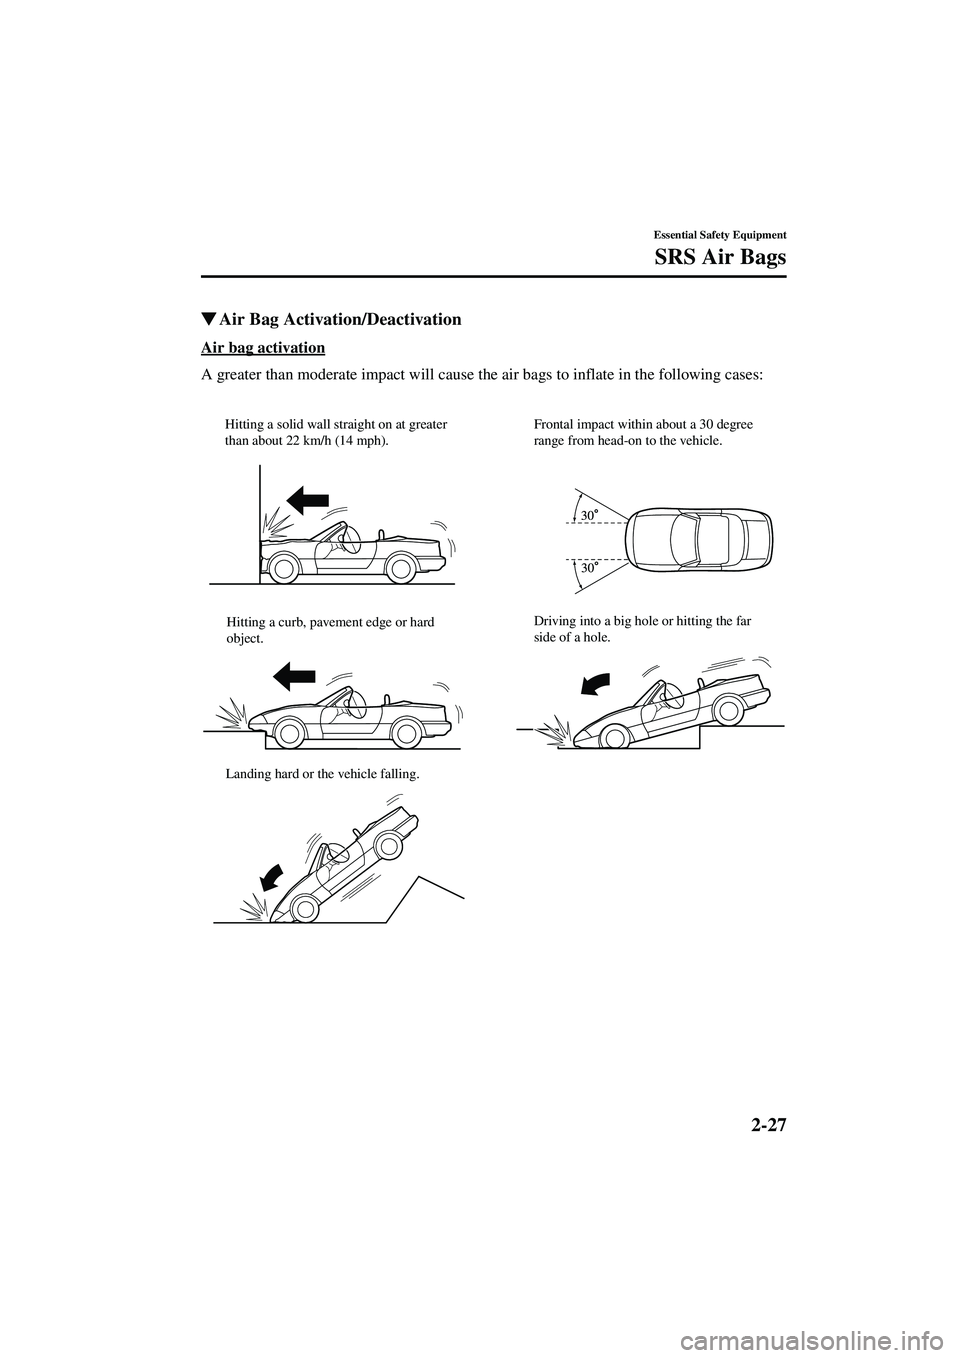 MAZDA MODEL MX-5 MIATA 2003 Owners Guide 2-27
Essential Safety Equipment
SRS Air Bags
Form No. 8R09-EA-02G
Air Bag Activation/Deactivation
Air bag activation
A greater than moderate impact will cause the air bags to inflate in the following